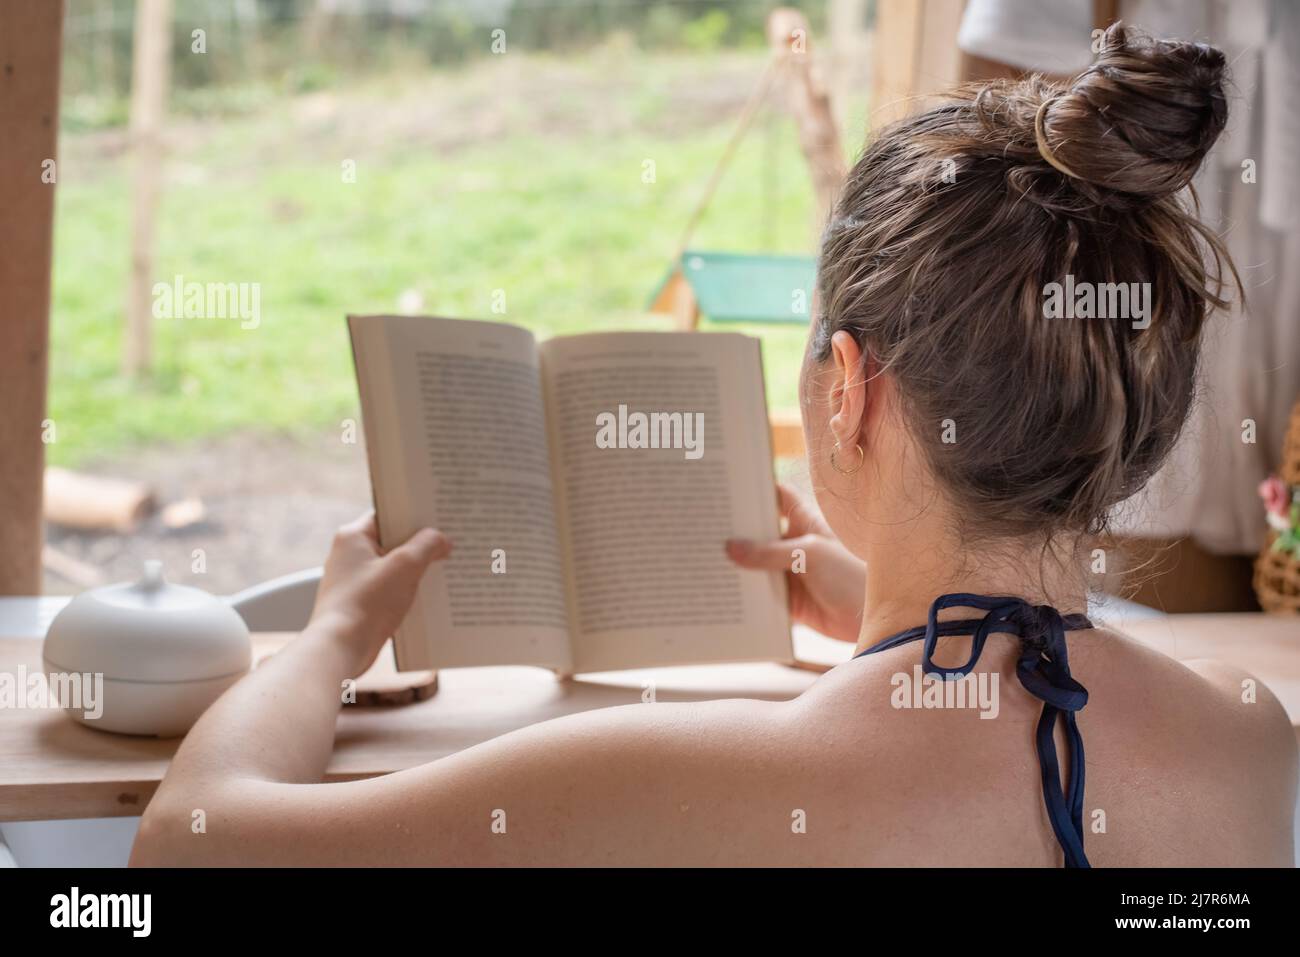 Relaxed woman reading a book in hot tub Stock Photo